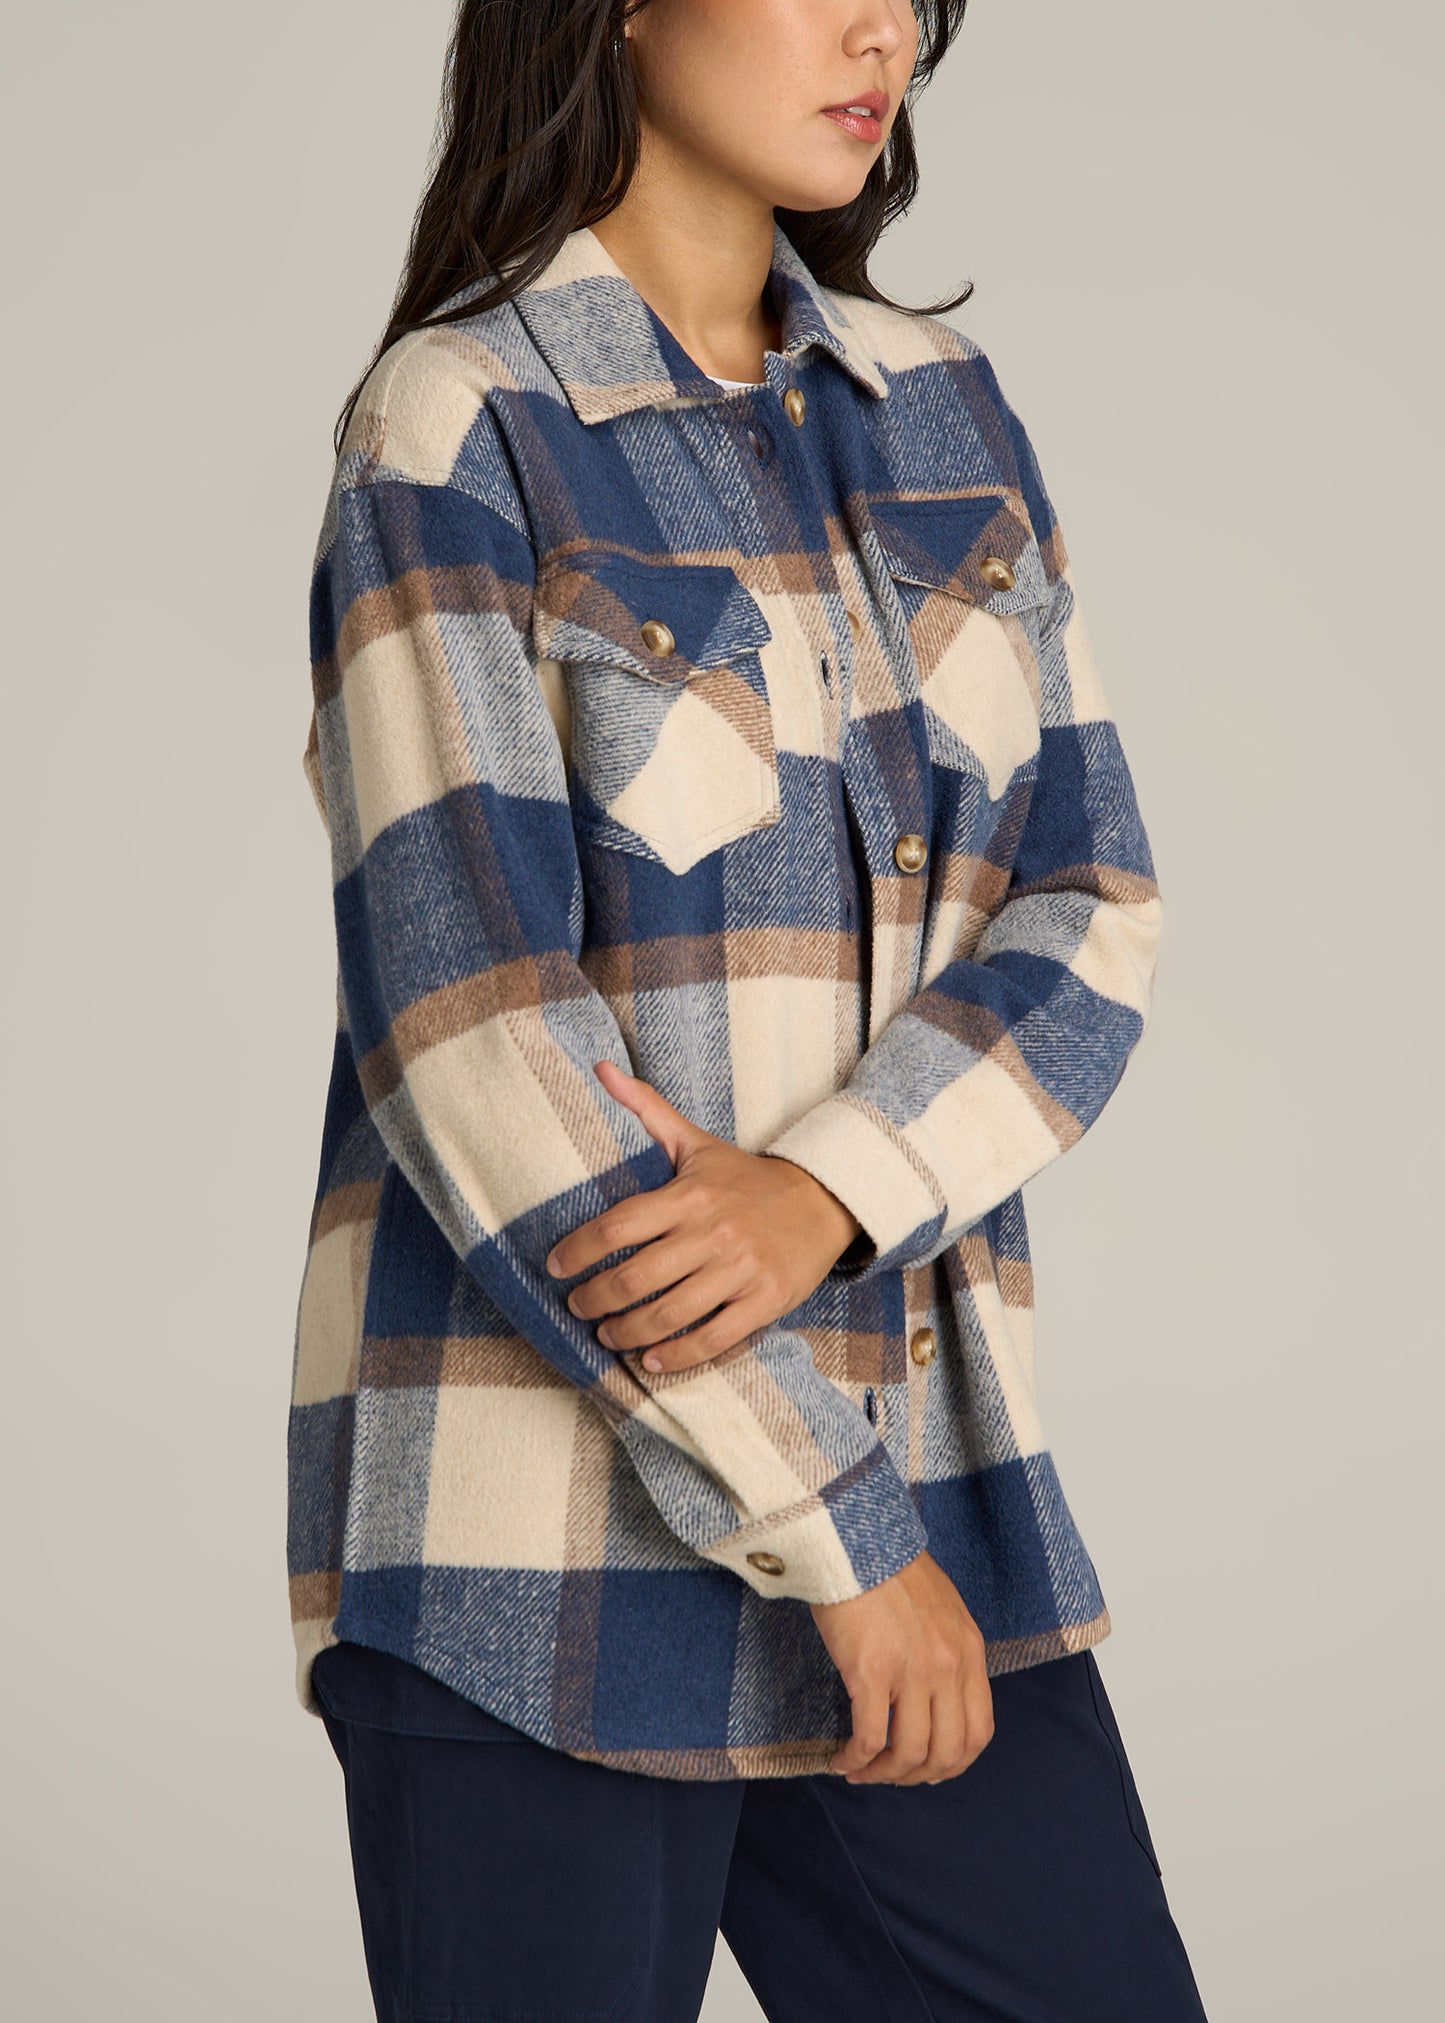 Flannel Women's Tall Shacket in Cream and Denim Blue Paid